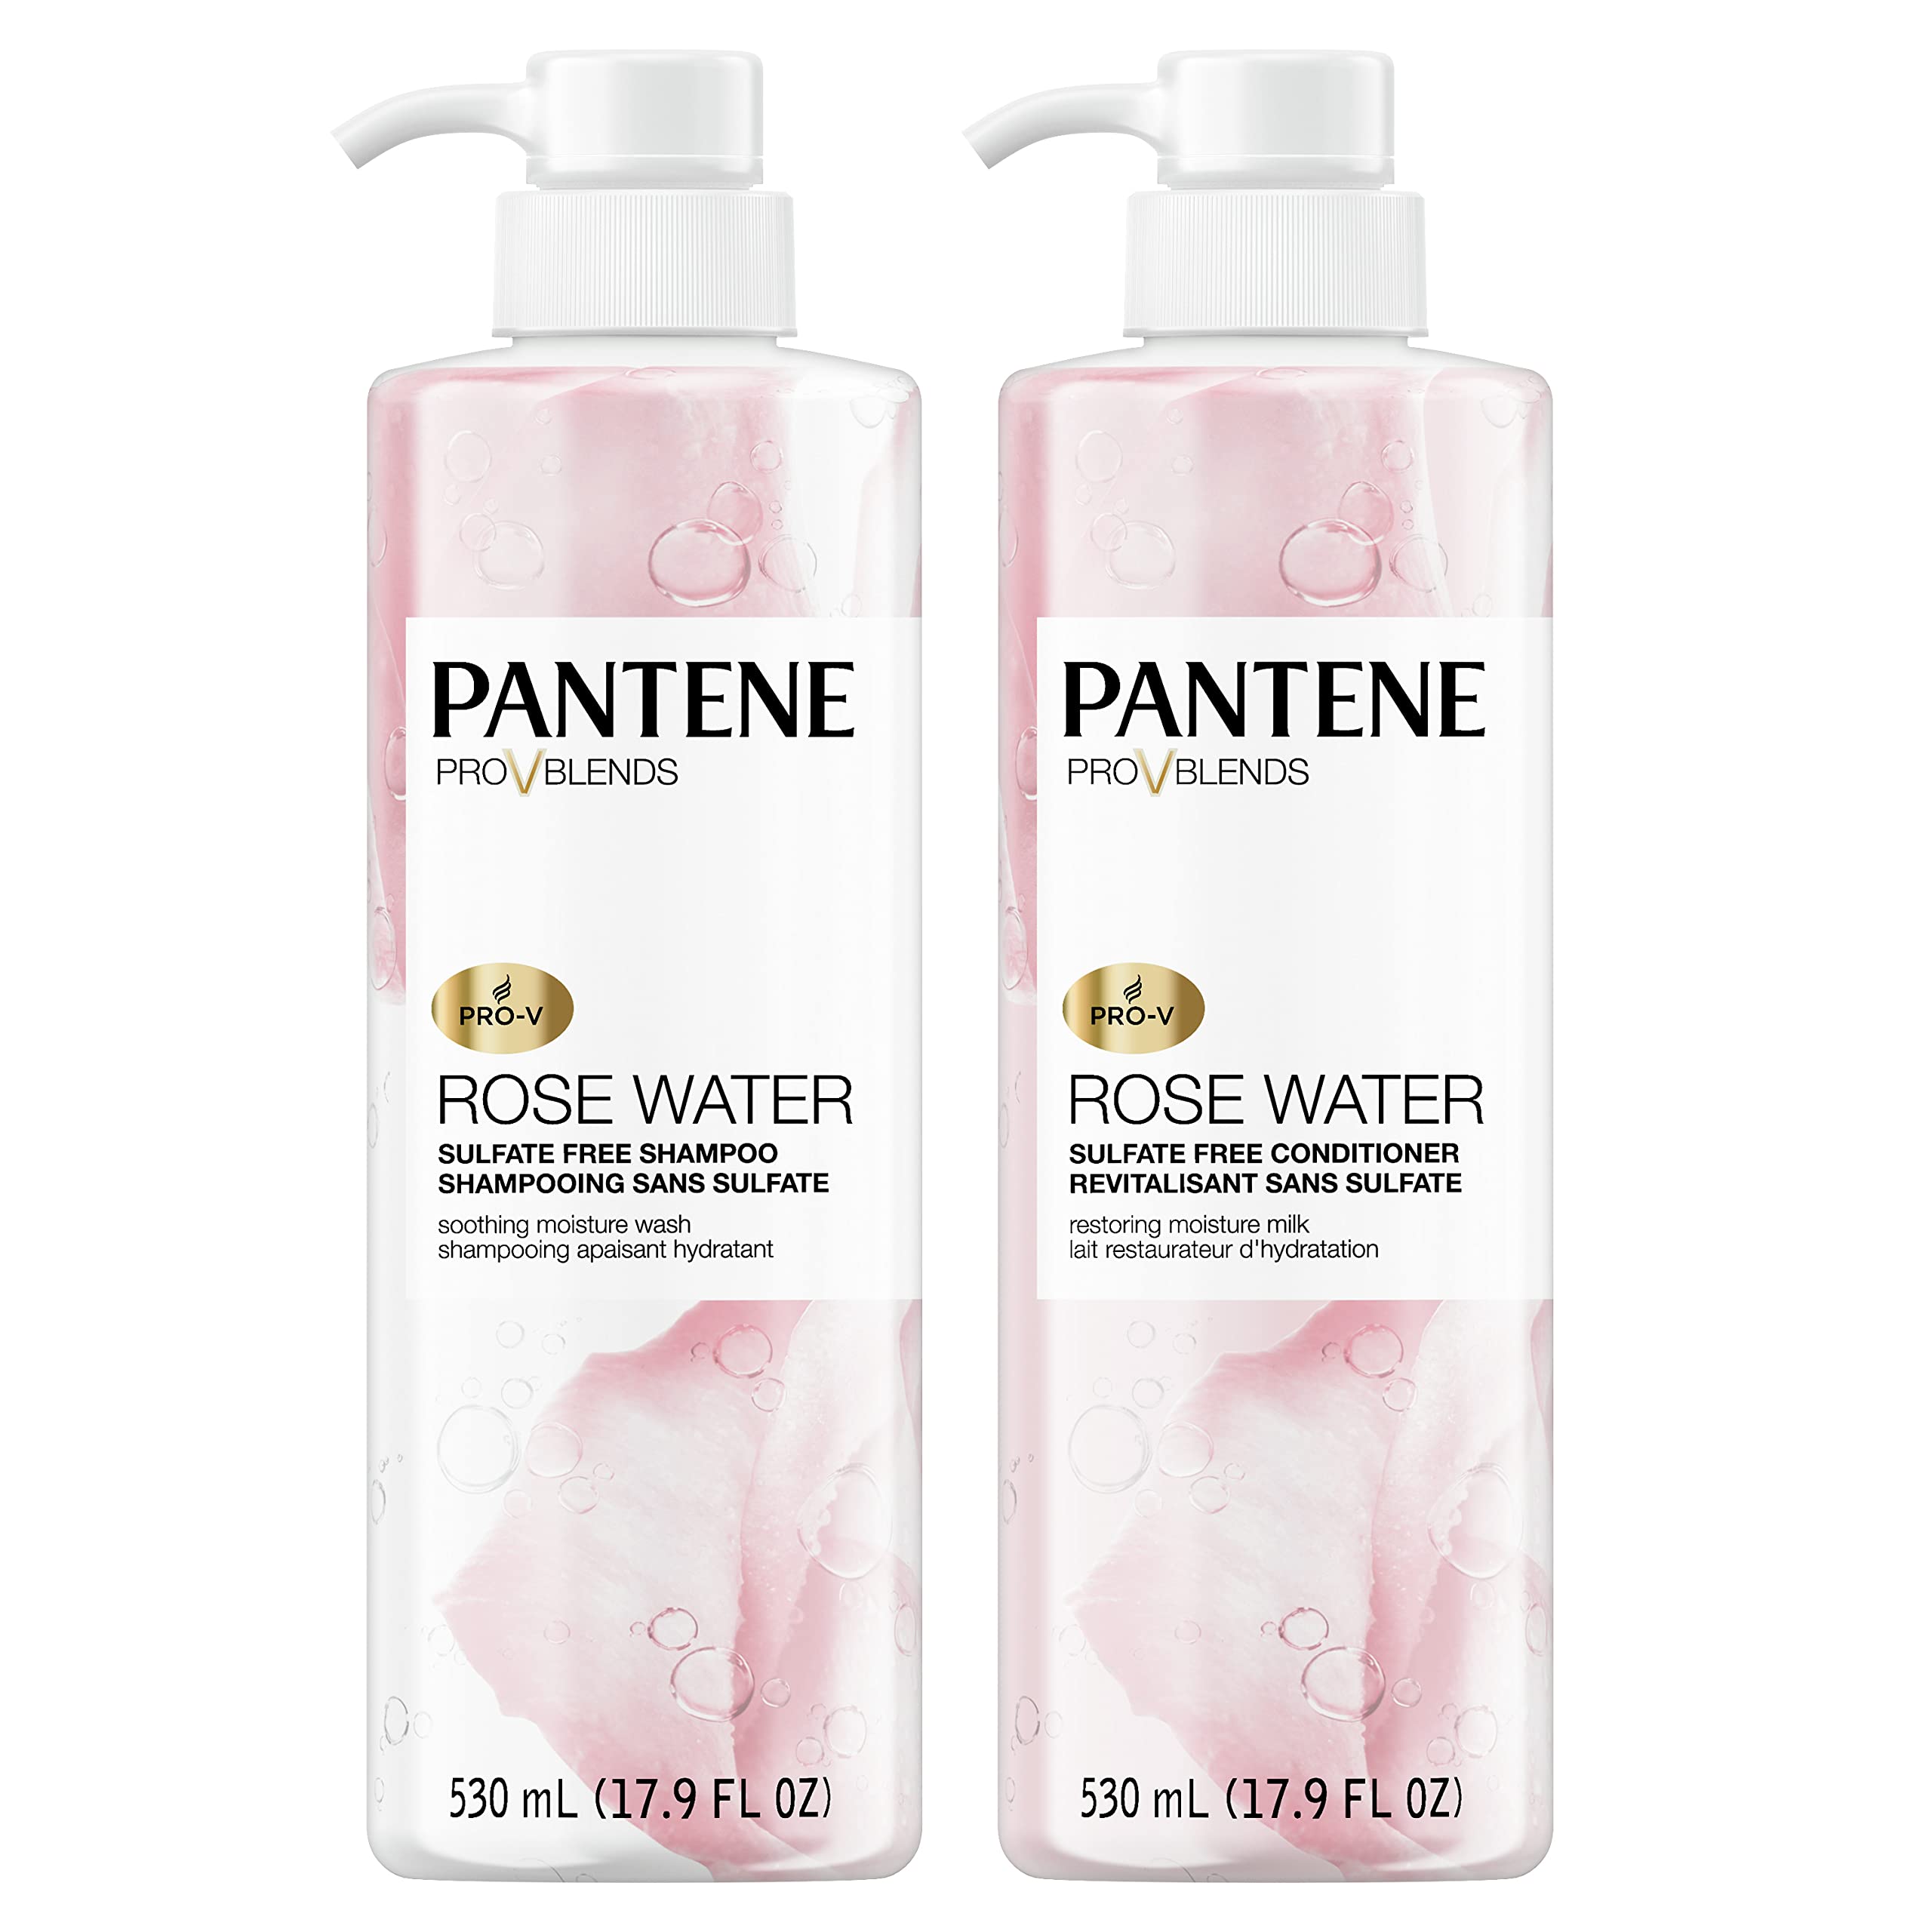 Pantene Sulfate Free Shampoo and Conditioner Set, Rose Water, Soothing and Moisturizing, Nutrient Infused with Vitamin B5, for all Hair Types, Safe for Color Treated Hair,Pro-V Blends, 17.9 oz,2-Count